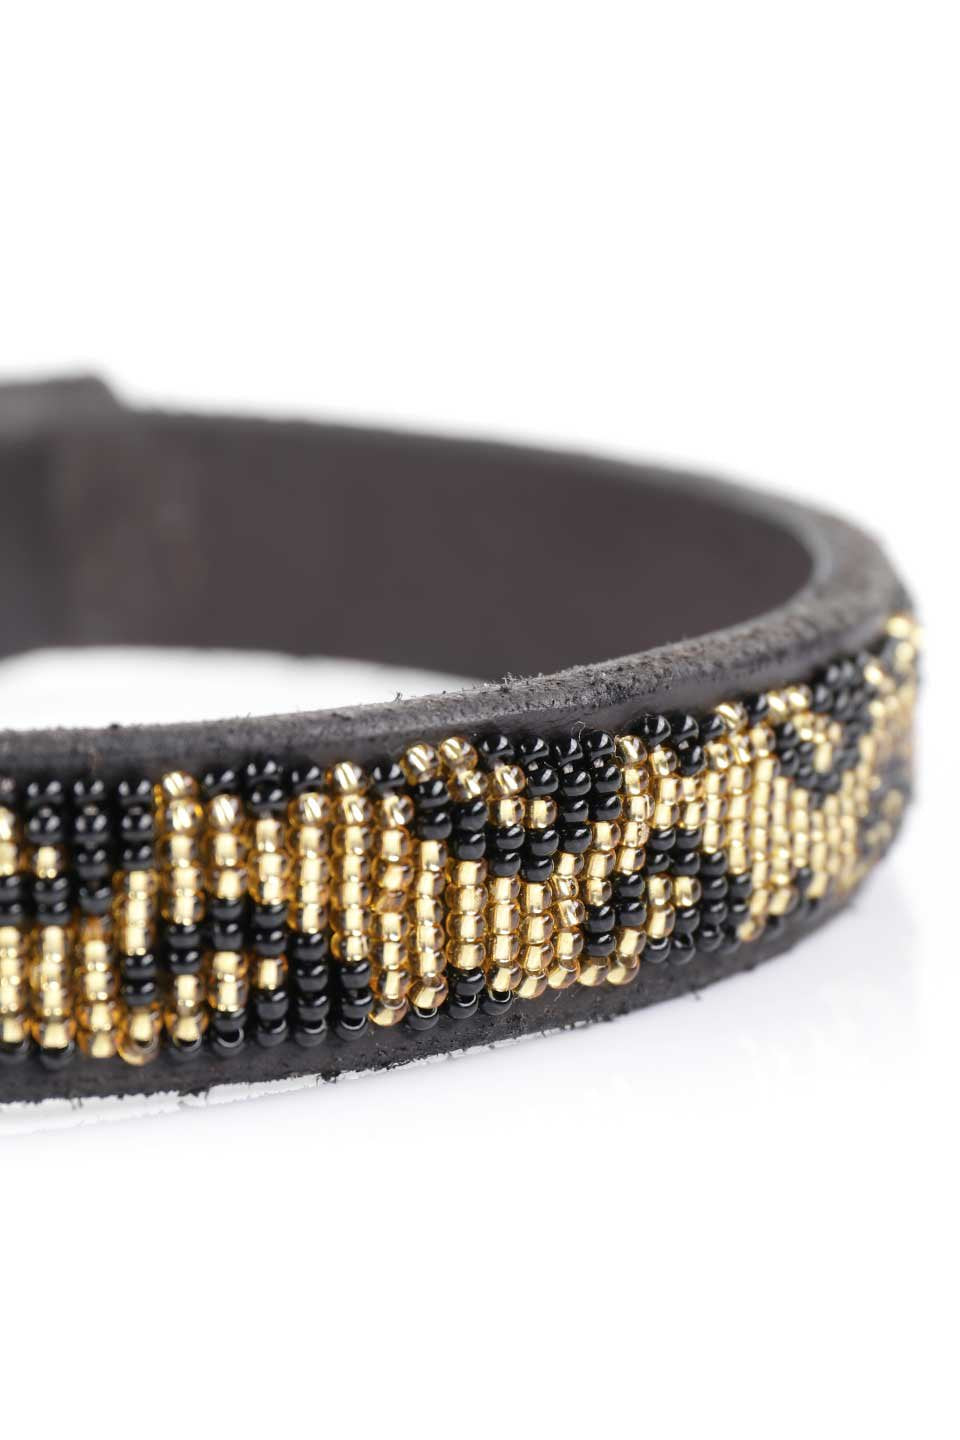 Leopard Beaded Dog Collar 14" レオパード・ビーズドッグカラー / by THE KENYAN COLLECTION